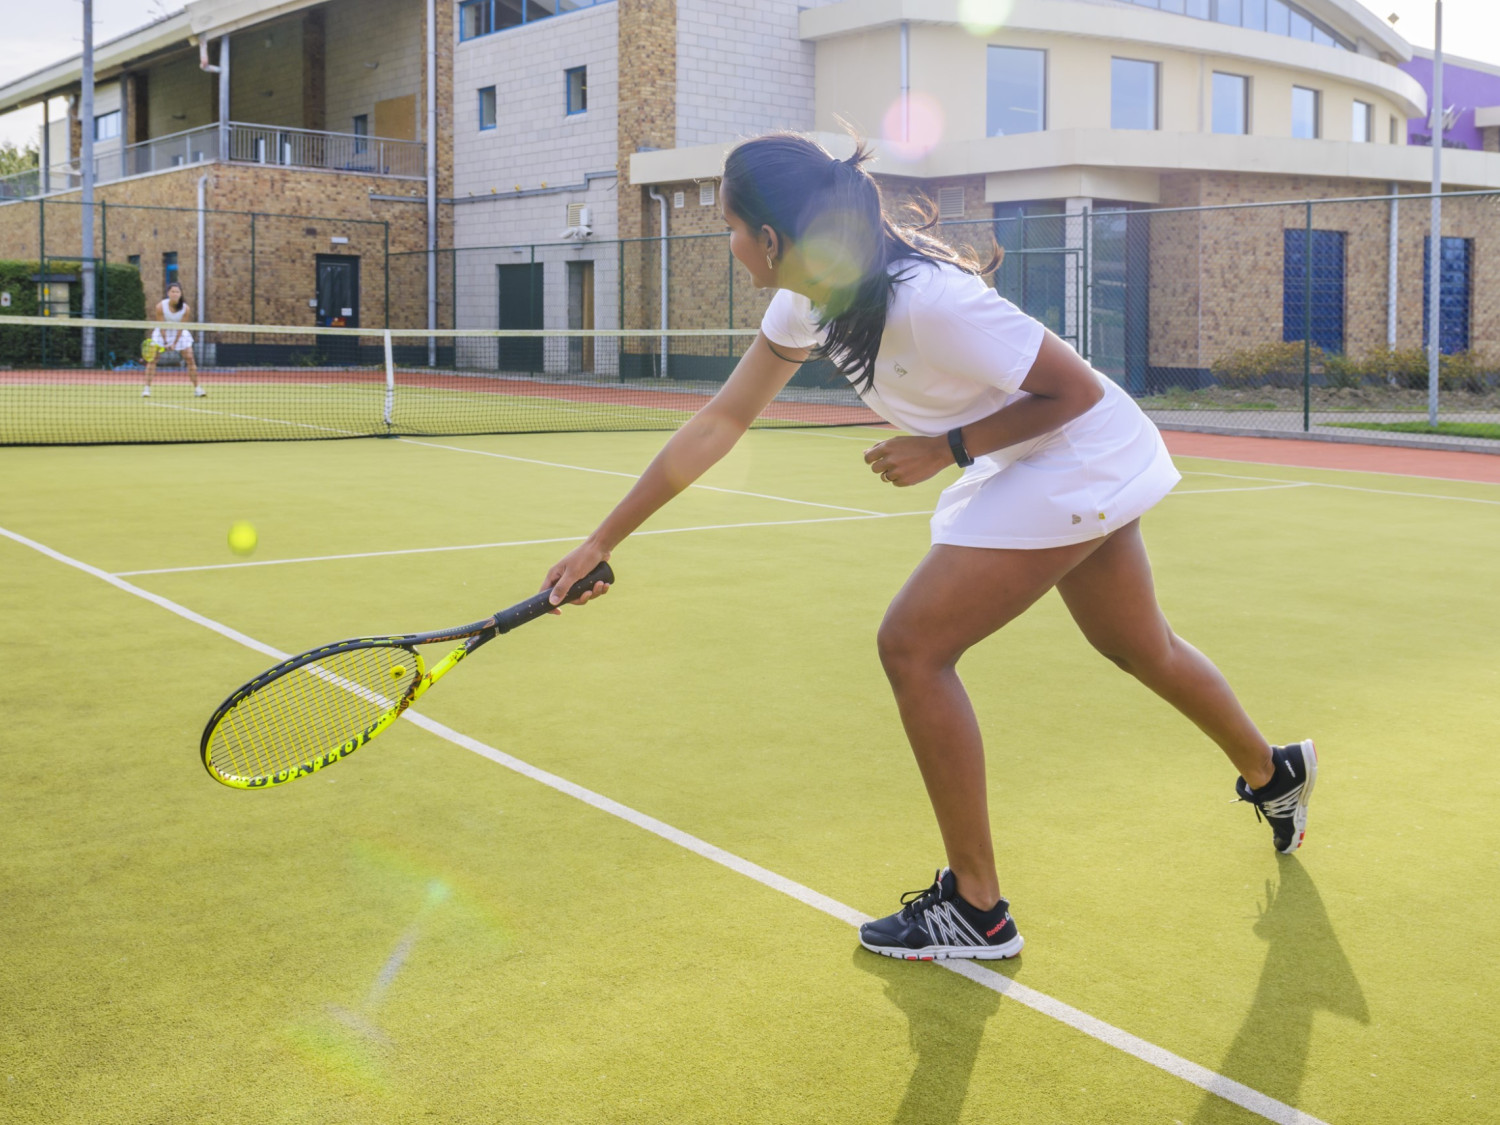 Tennis competitions at West Wood Club Dublin